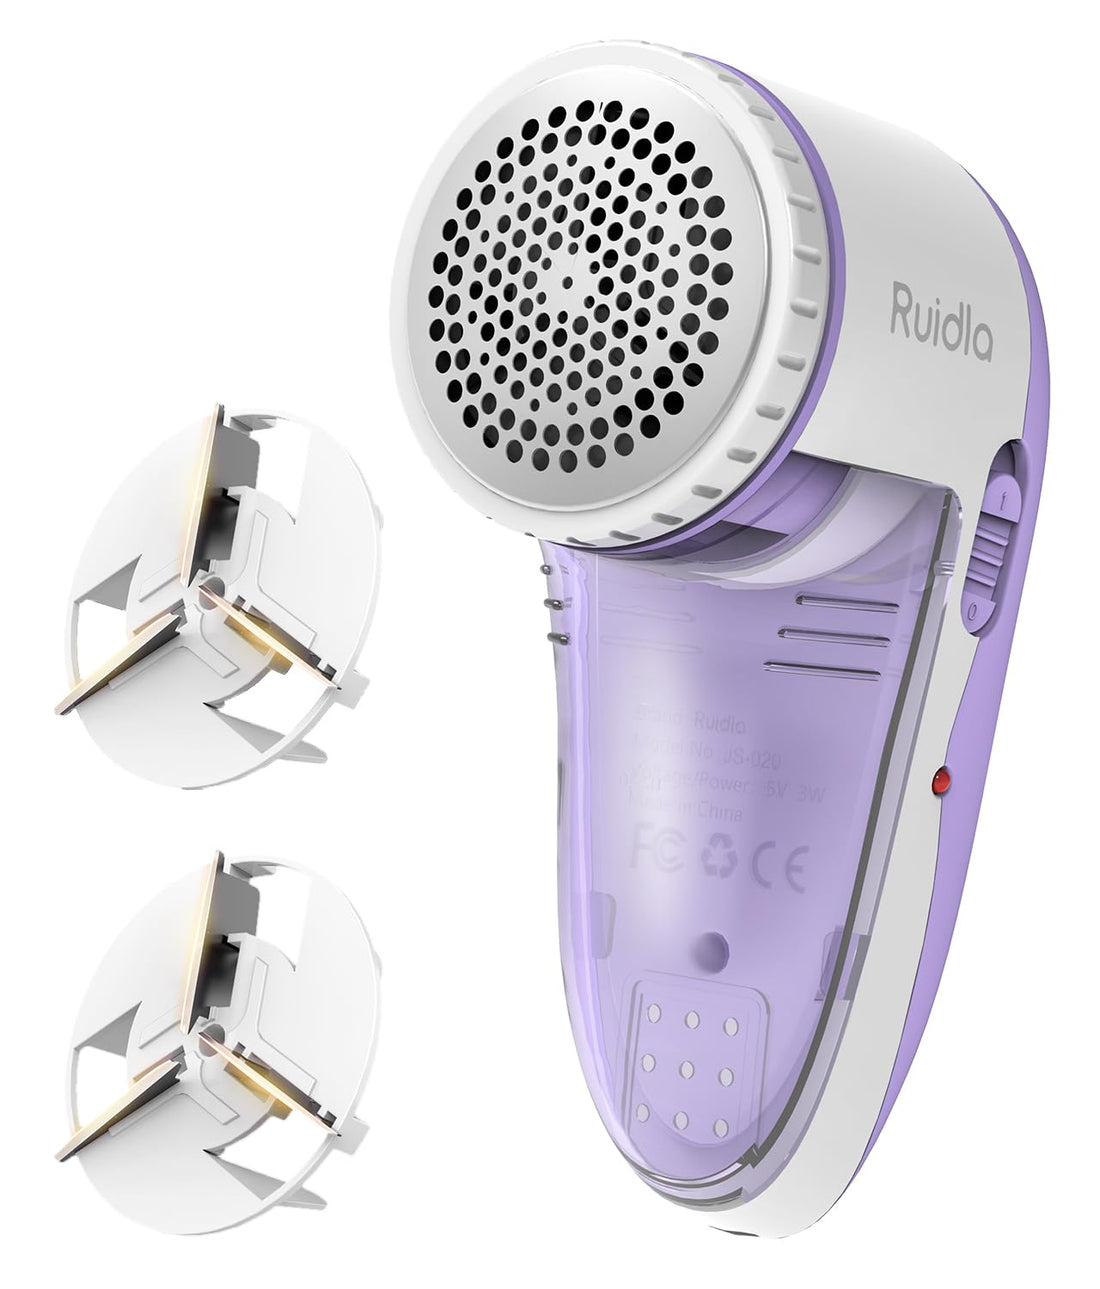 Ruidla Fabric Shaver Defuzzer, Electric Lint Remover, Rechargeable Sweater Shaver with Replaceable Stainless Steel 3-Blades, Dual Protection, Removable Bin, Easy Remove Fuzz, Lint, Pills, Bobbles